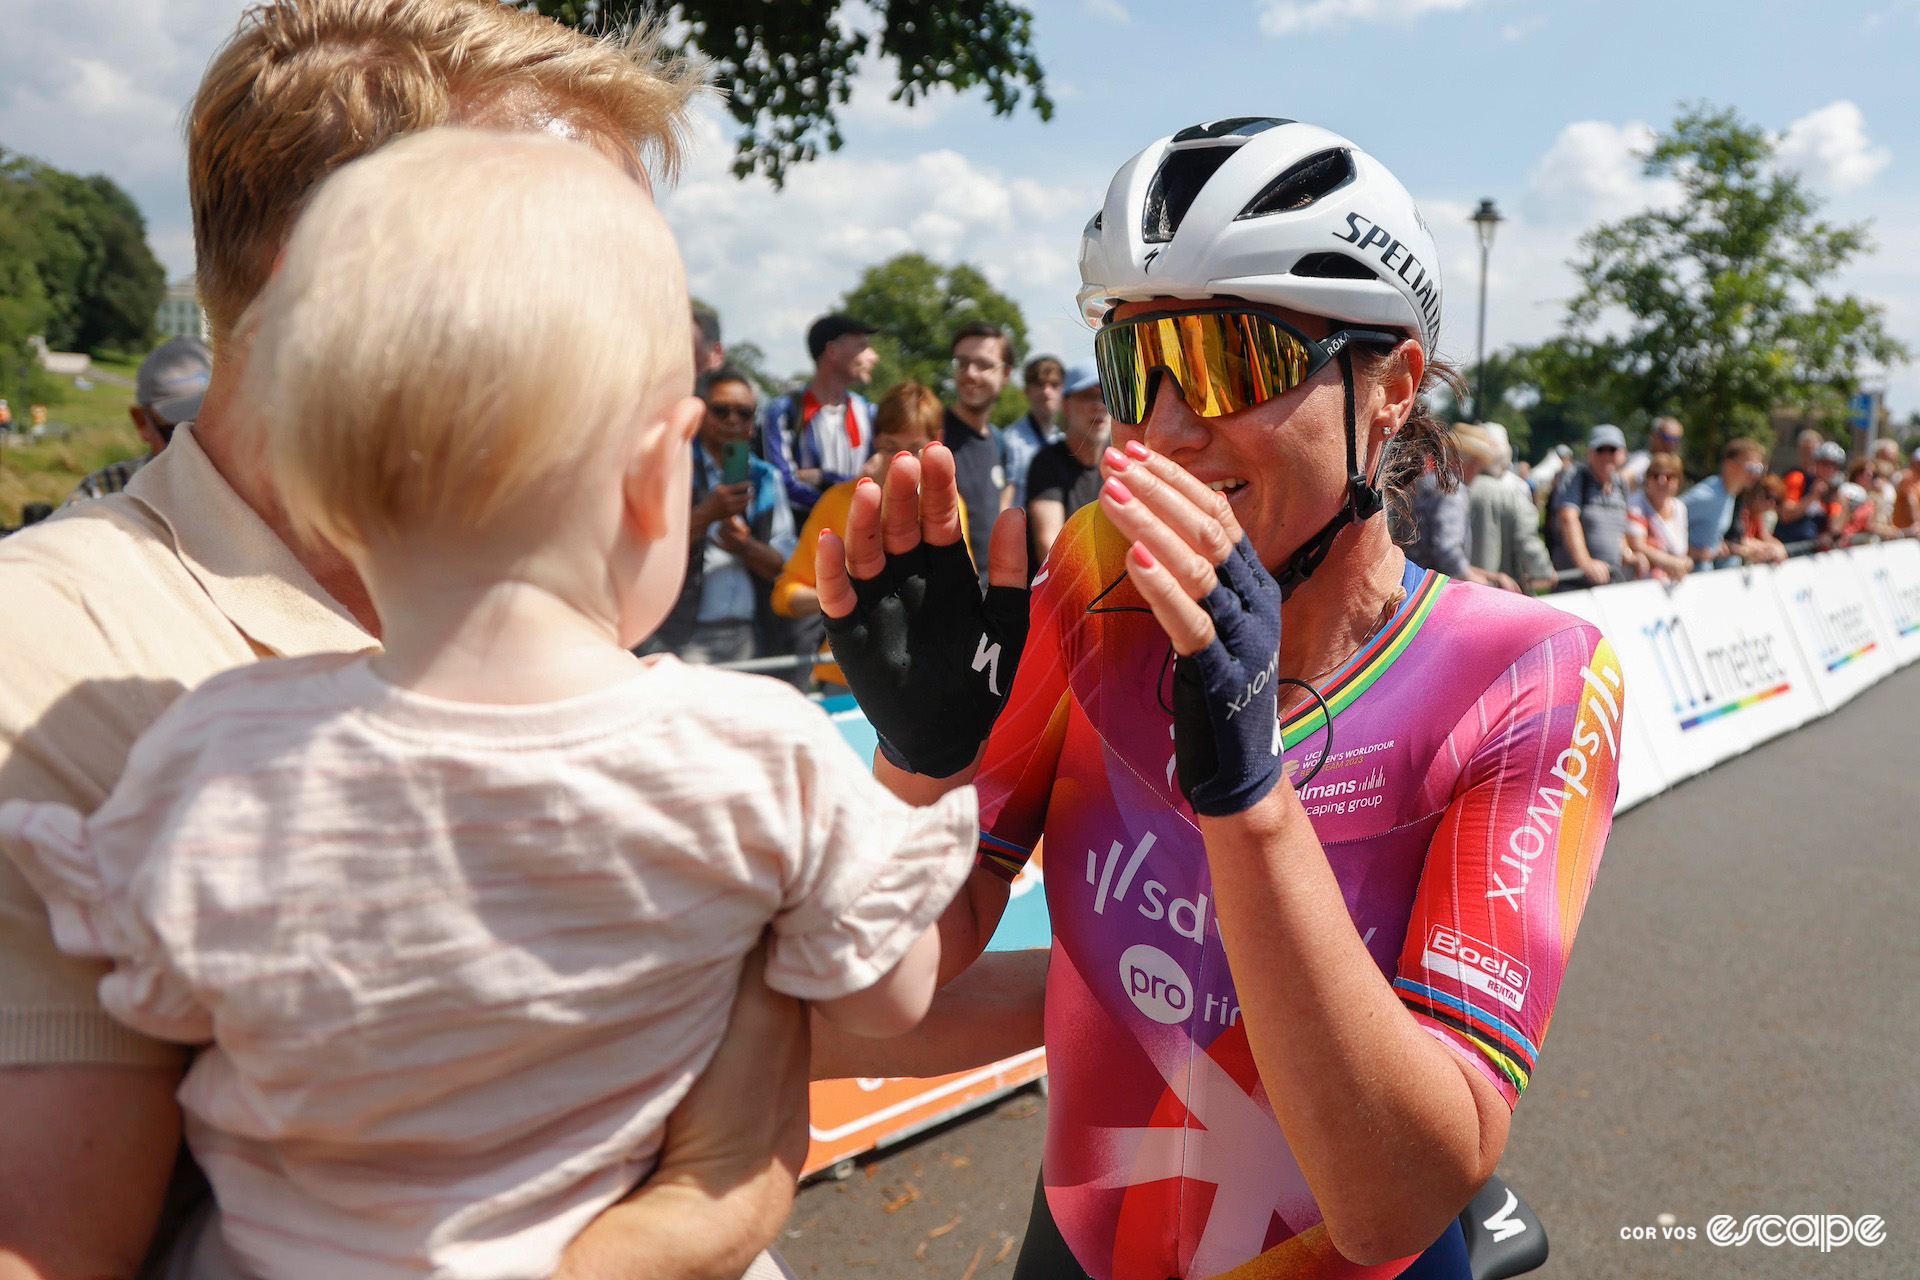 Chantal van den Broek-Blaak emotionally celebrates victory at the Dutch national road championships with her one-year-old daughter and partner.